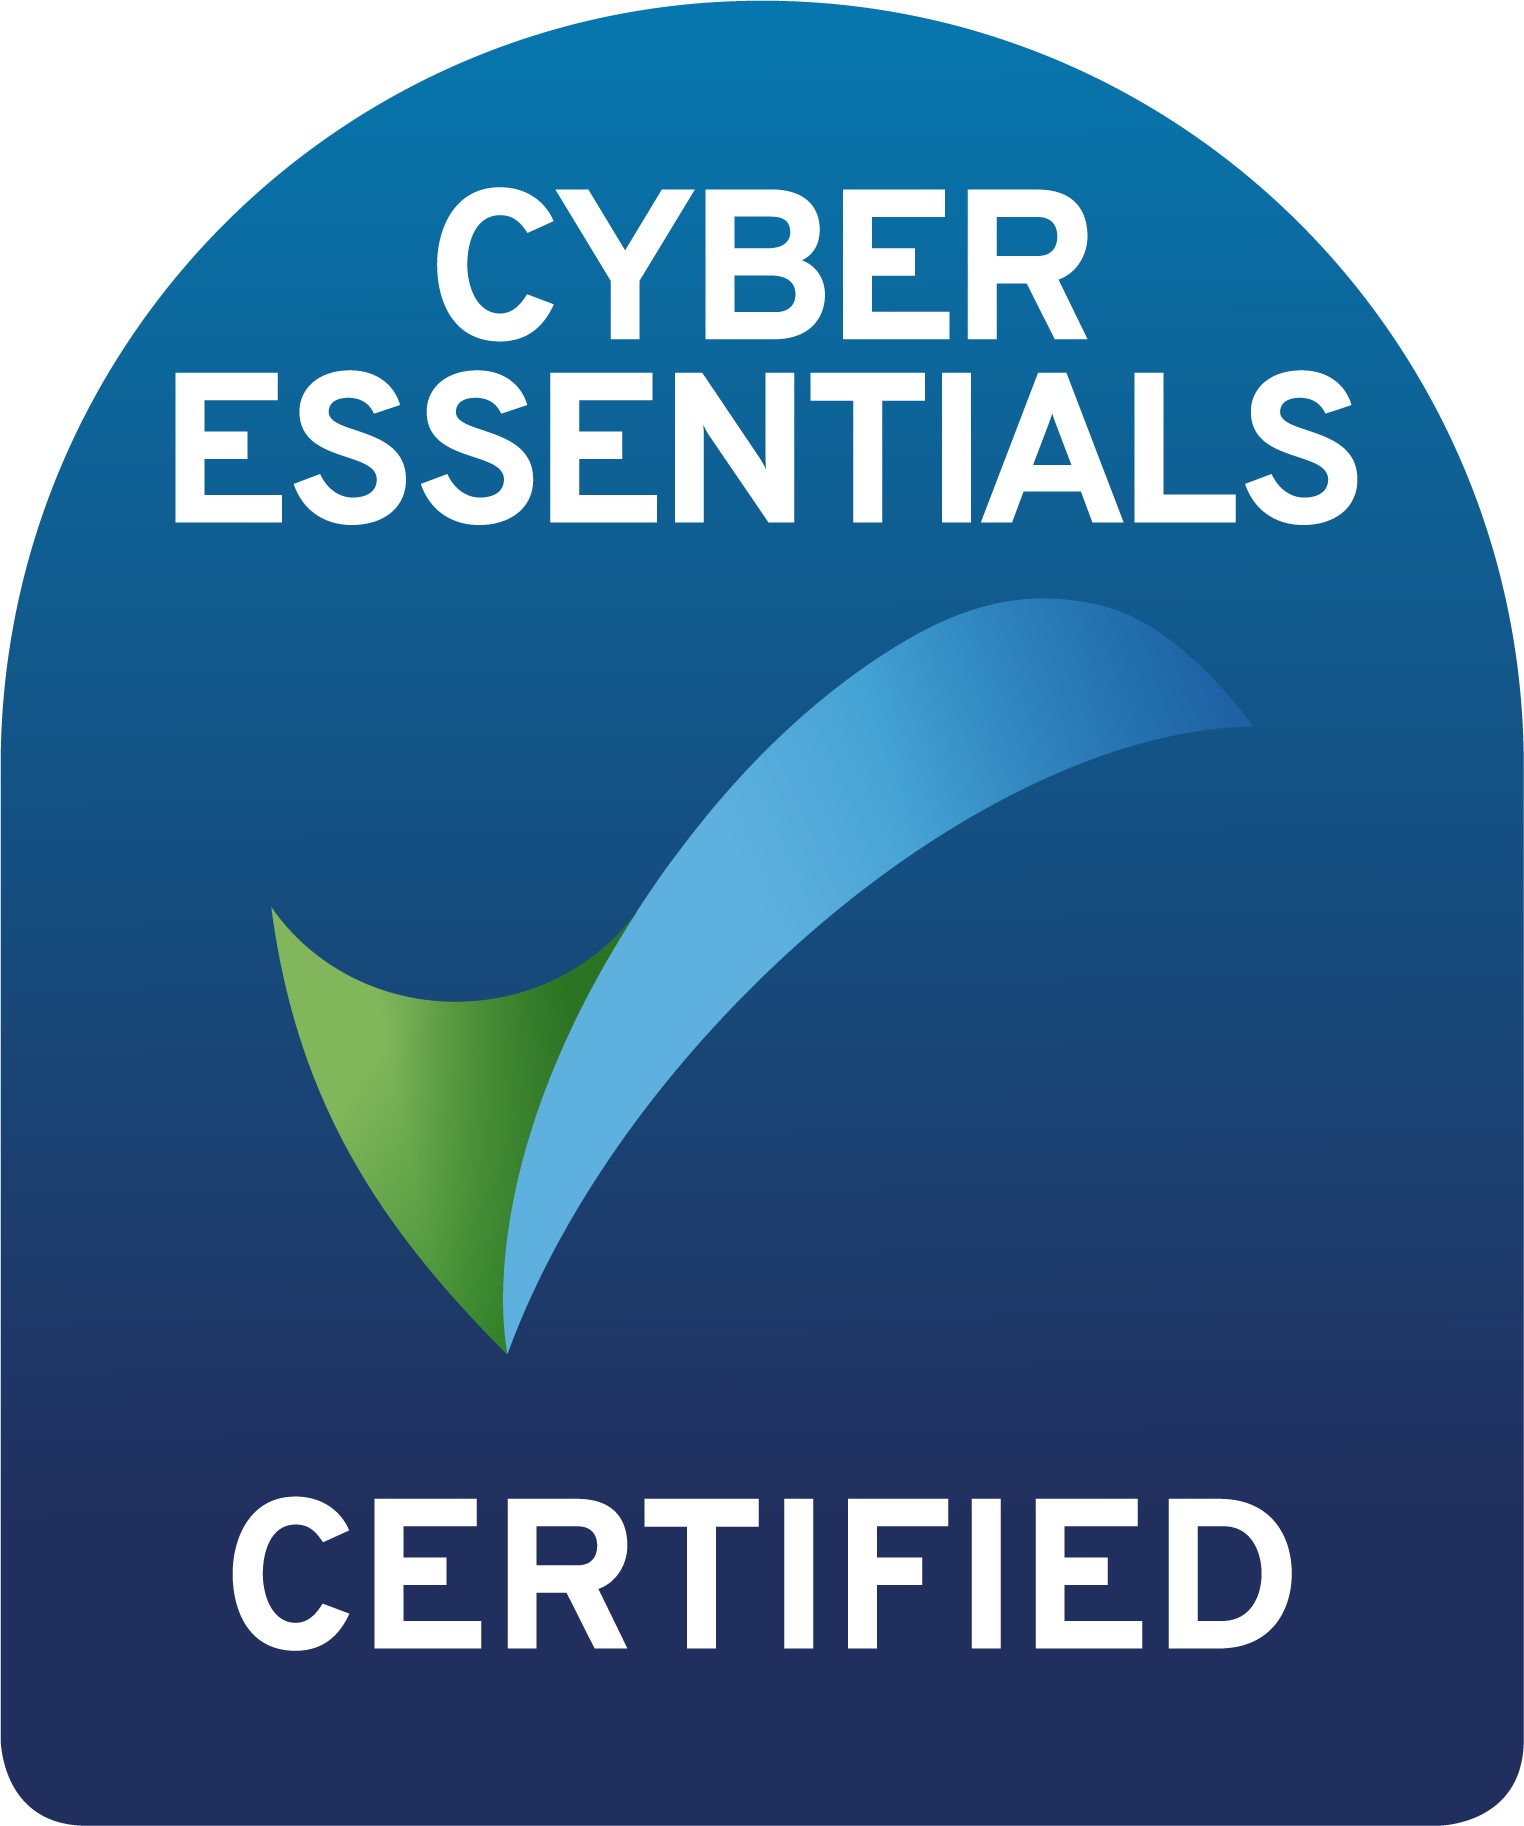 cyberessentials certification mark in colour